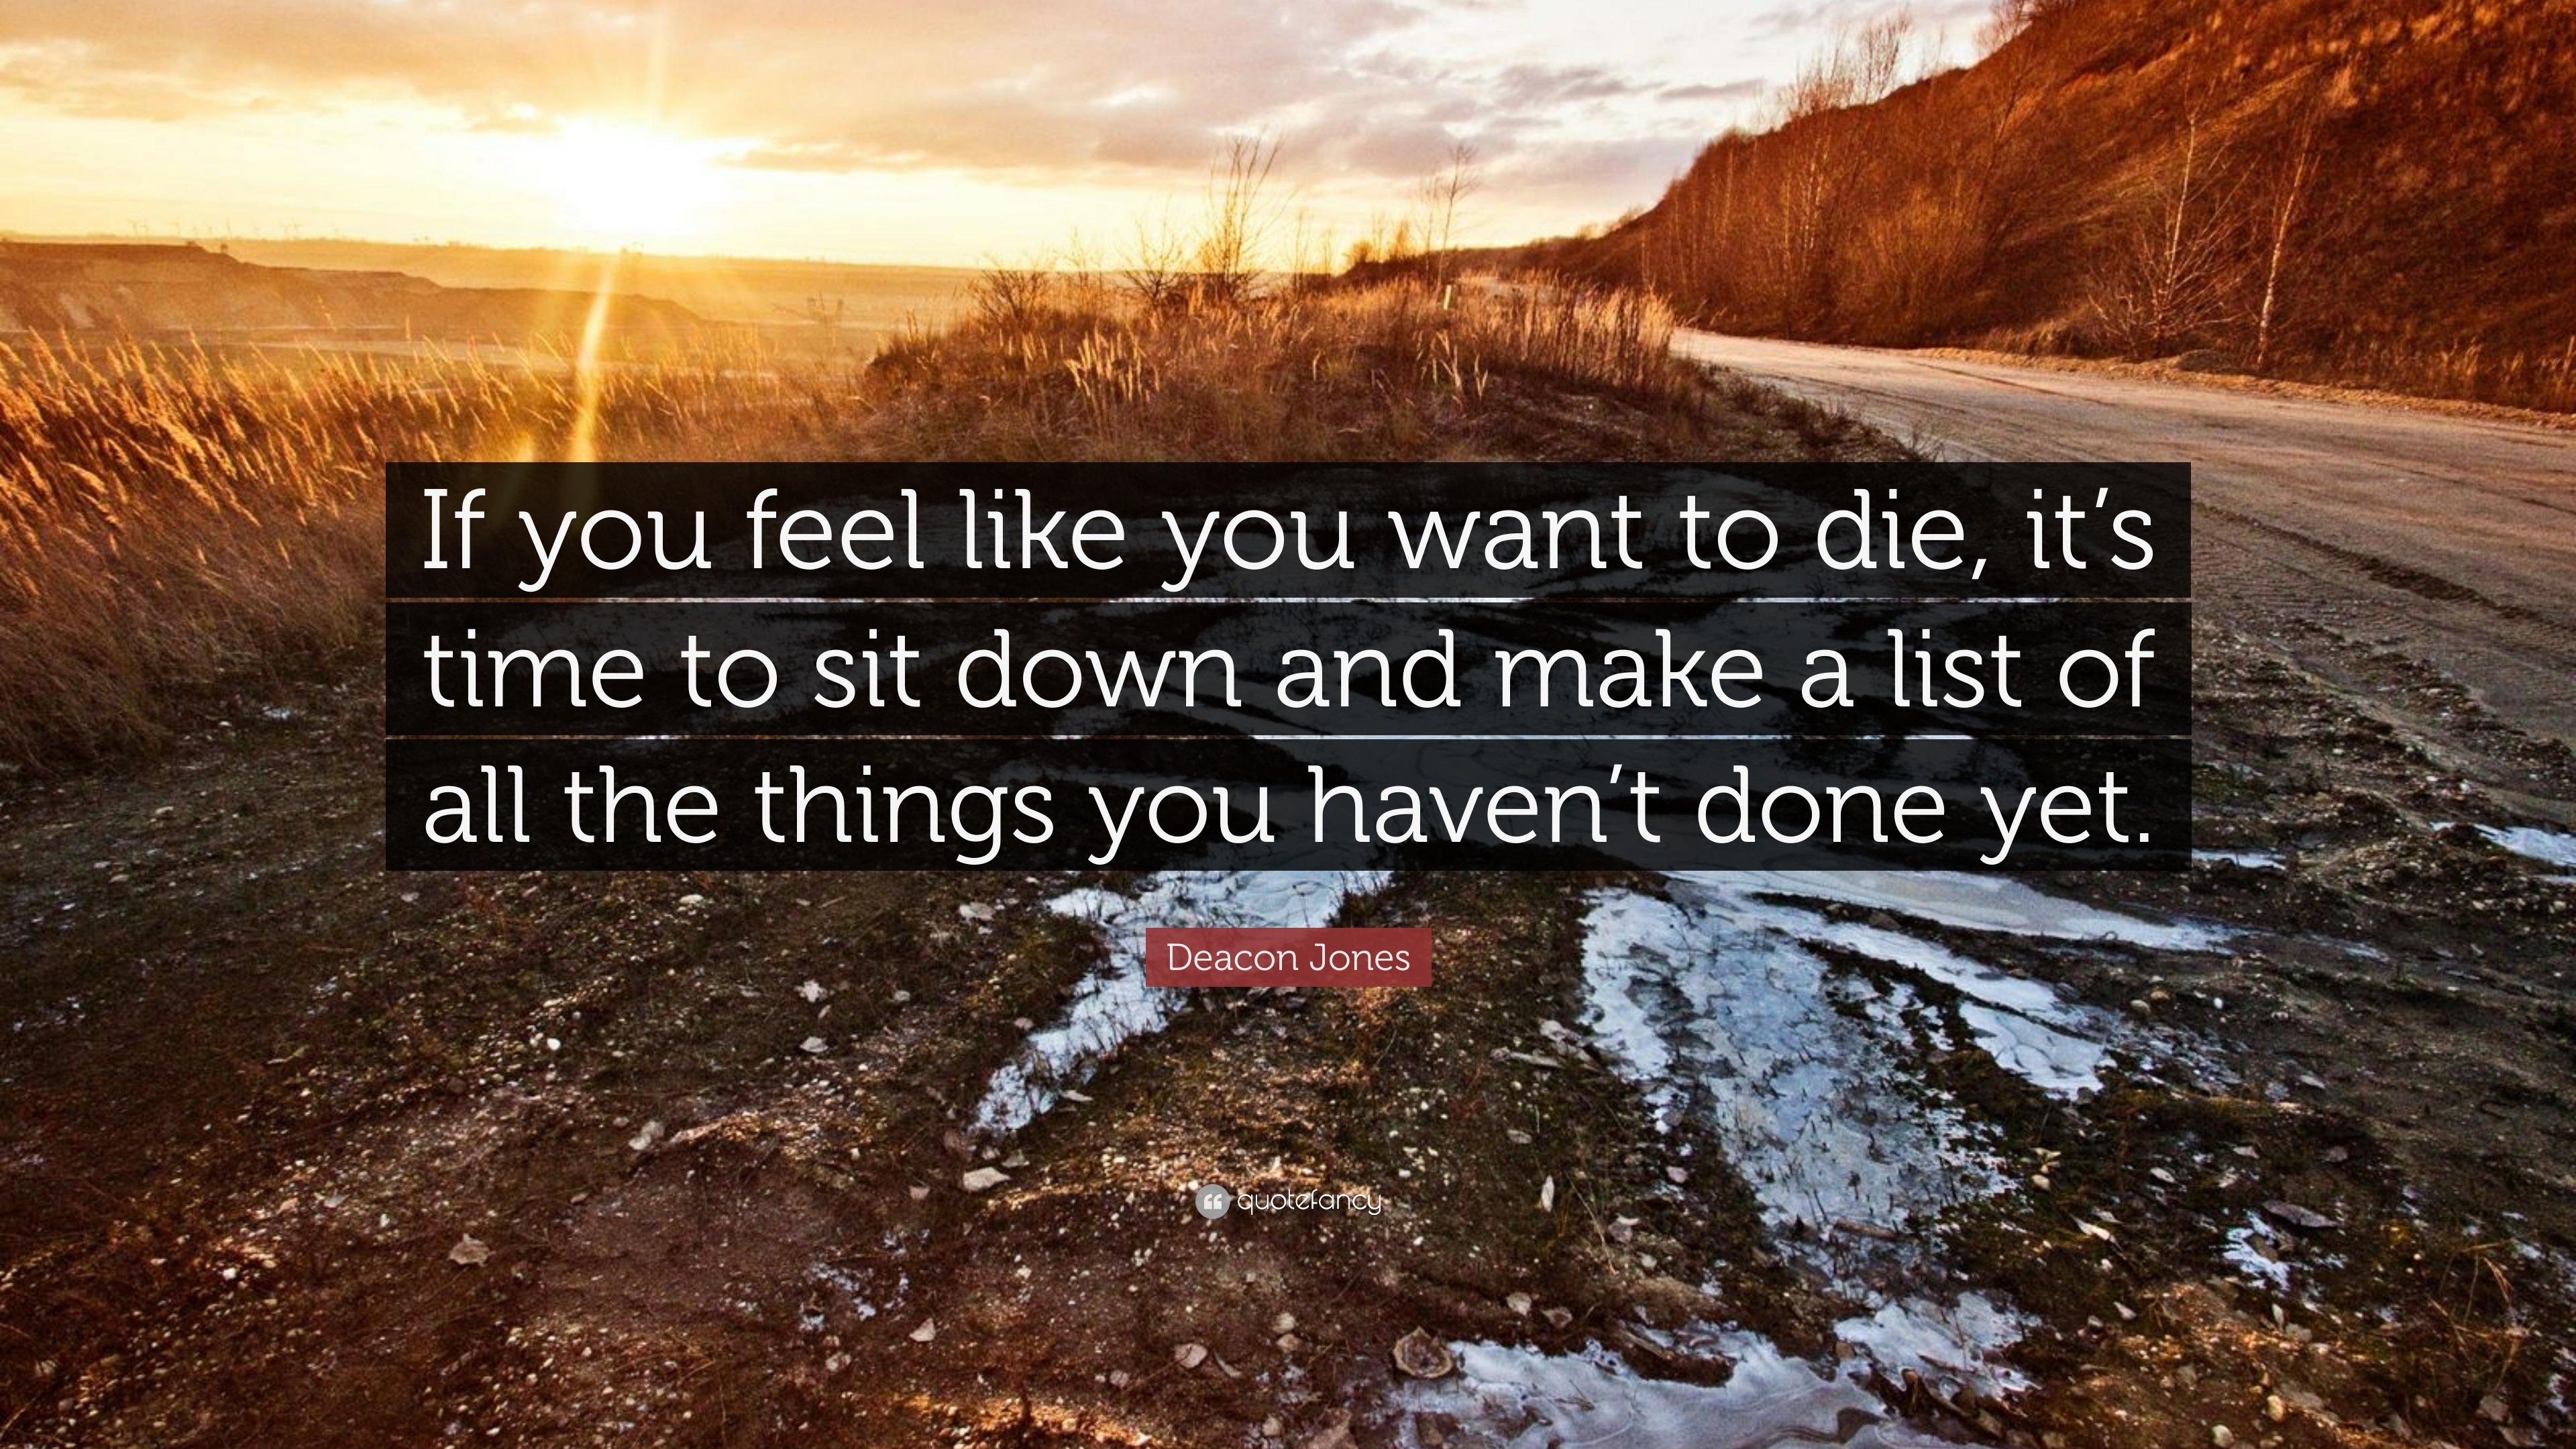 I Want to Die - What to Do When You Feel You Want to Die